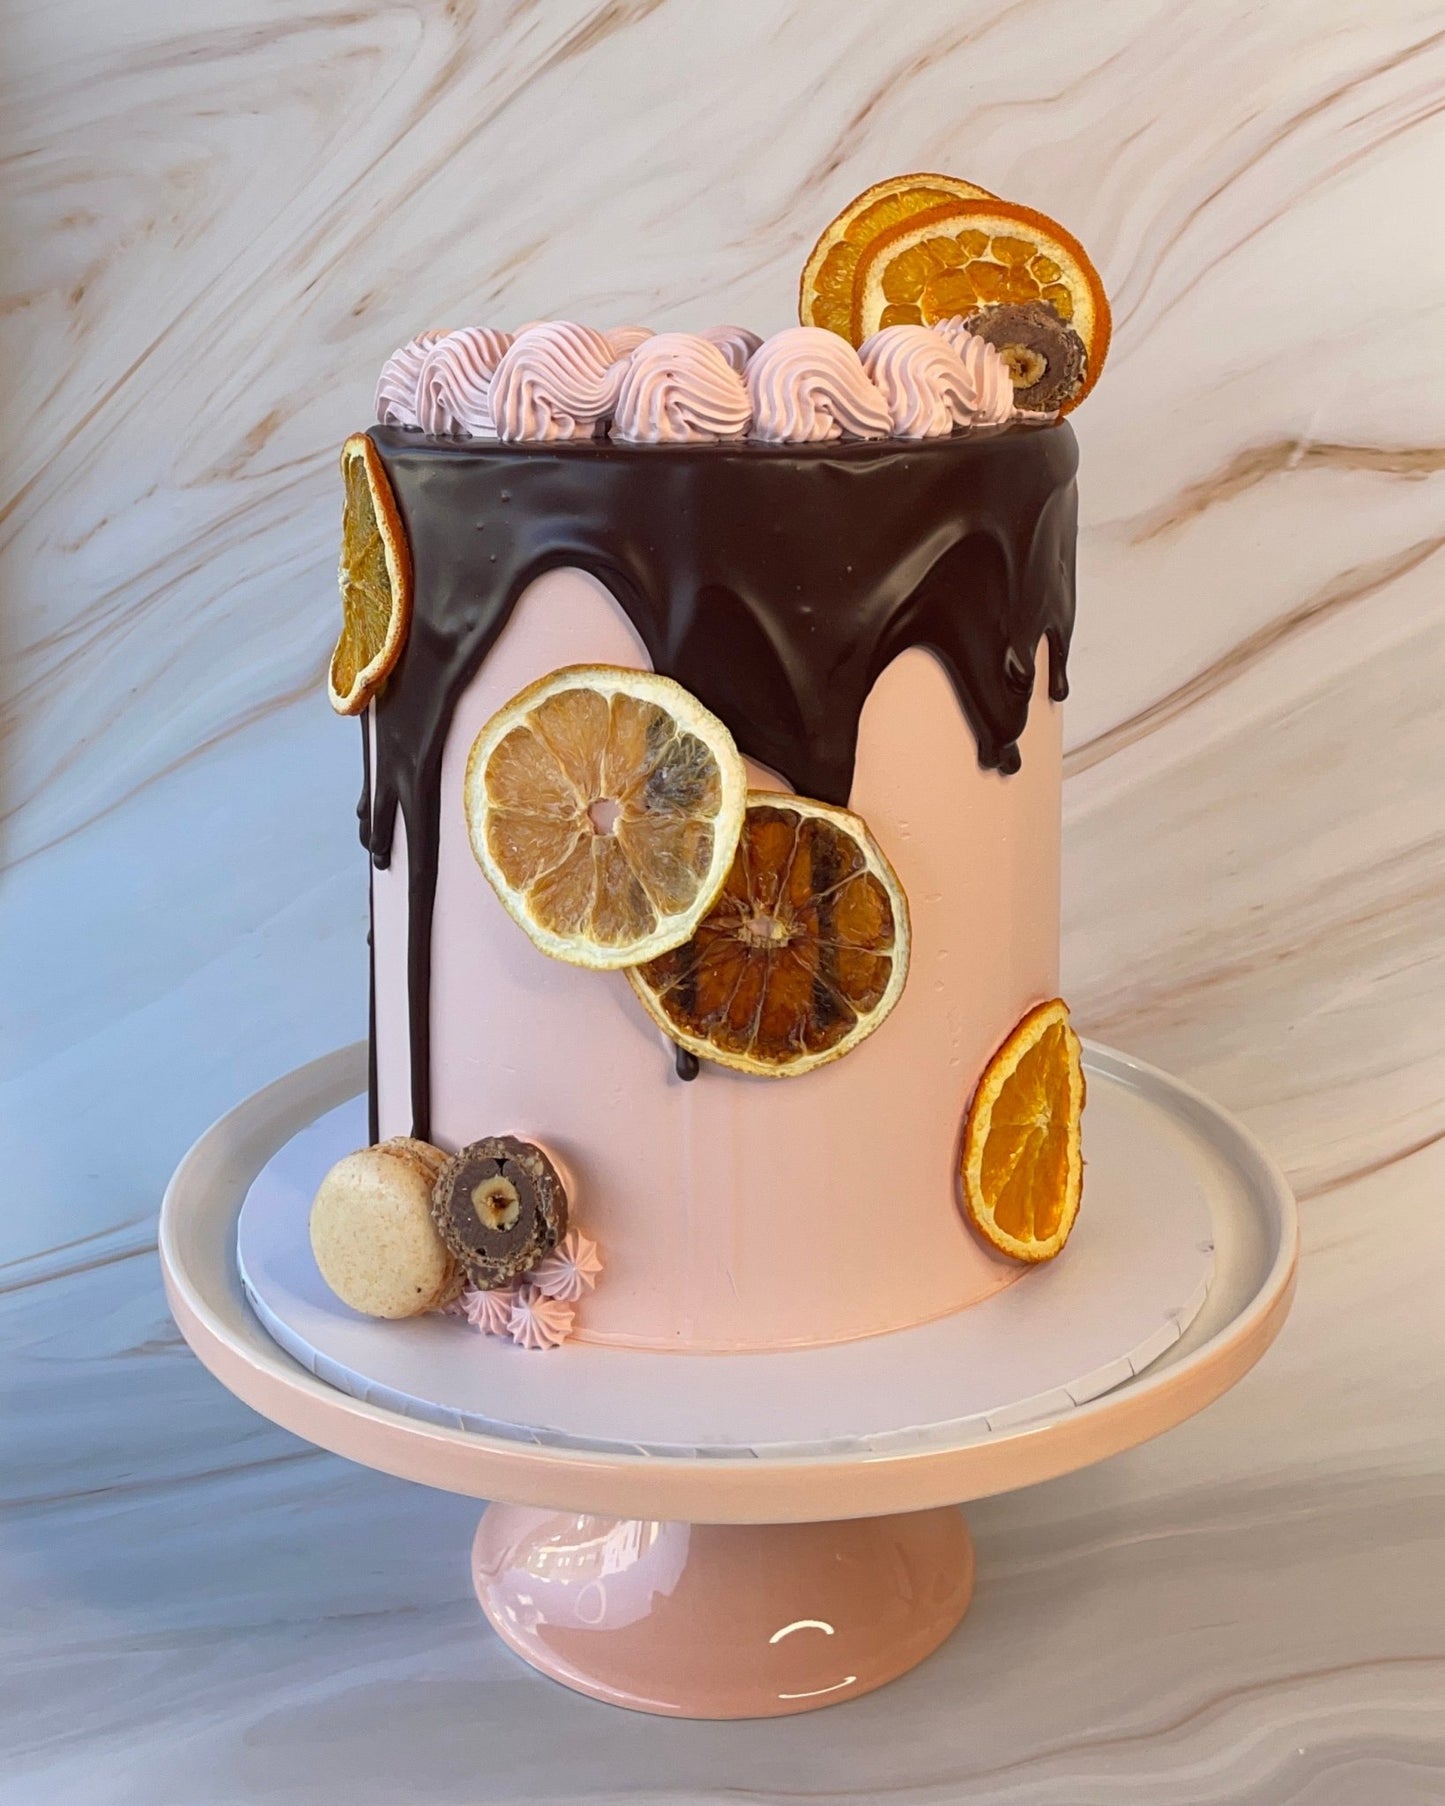 Load image into Gallery viewer, Dusty Citrus Cake - Flour Lane
